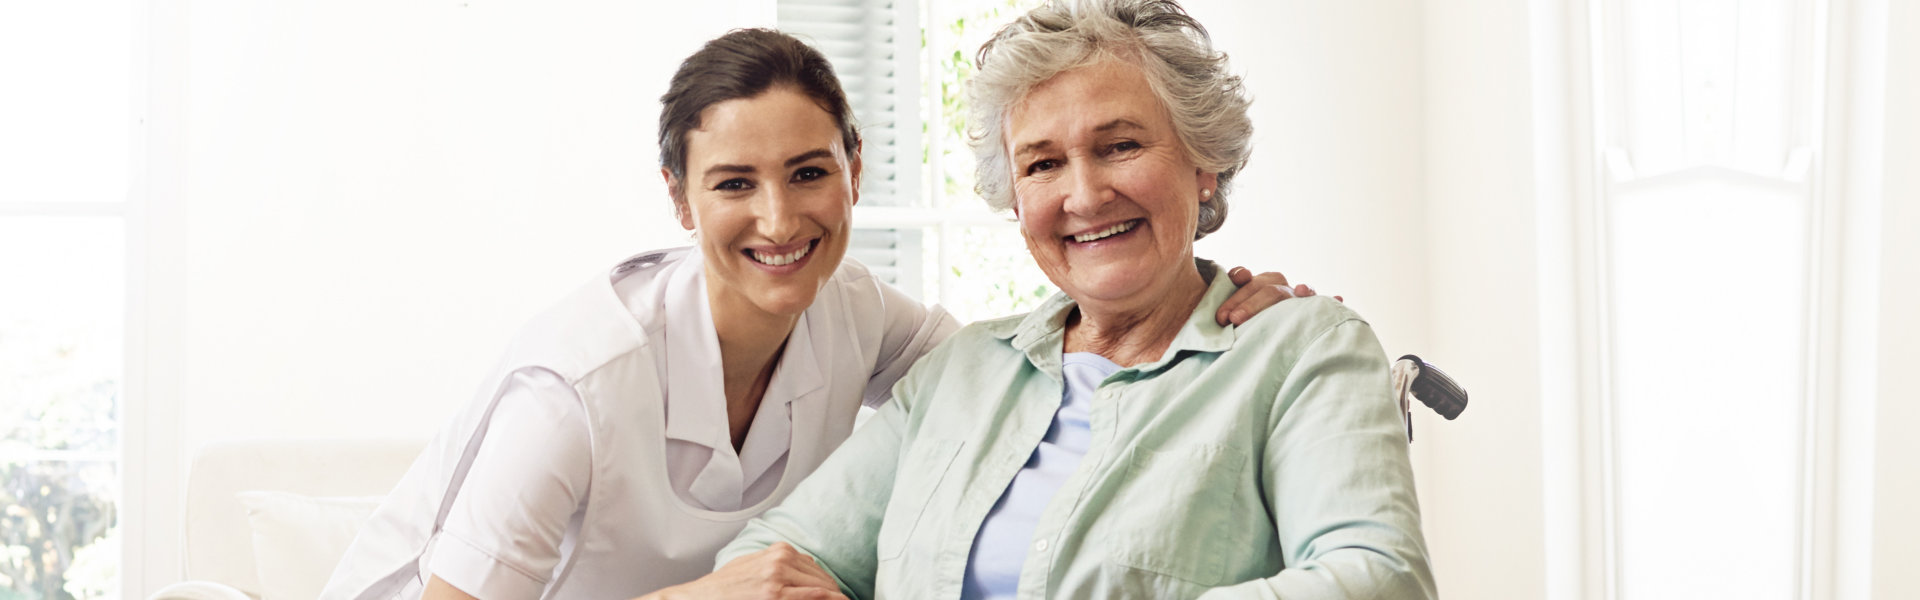 nurse and elderly woman looking at the camera